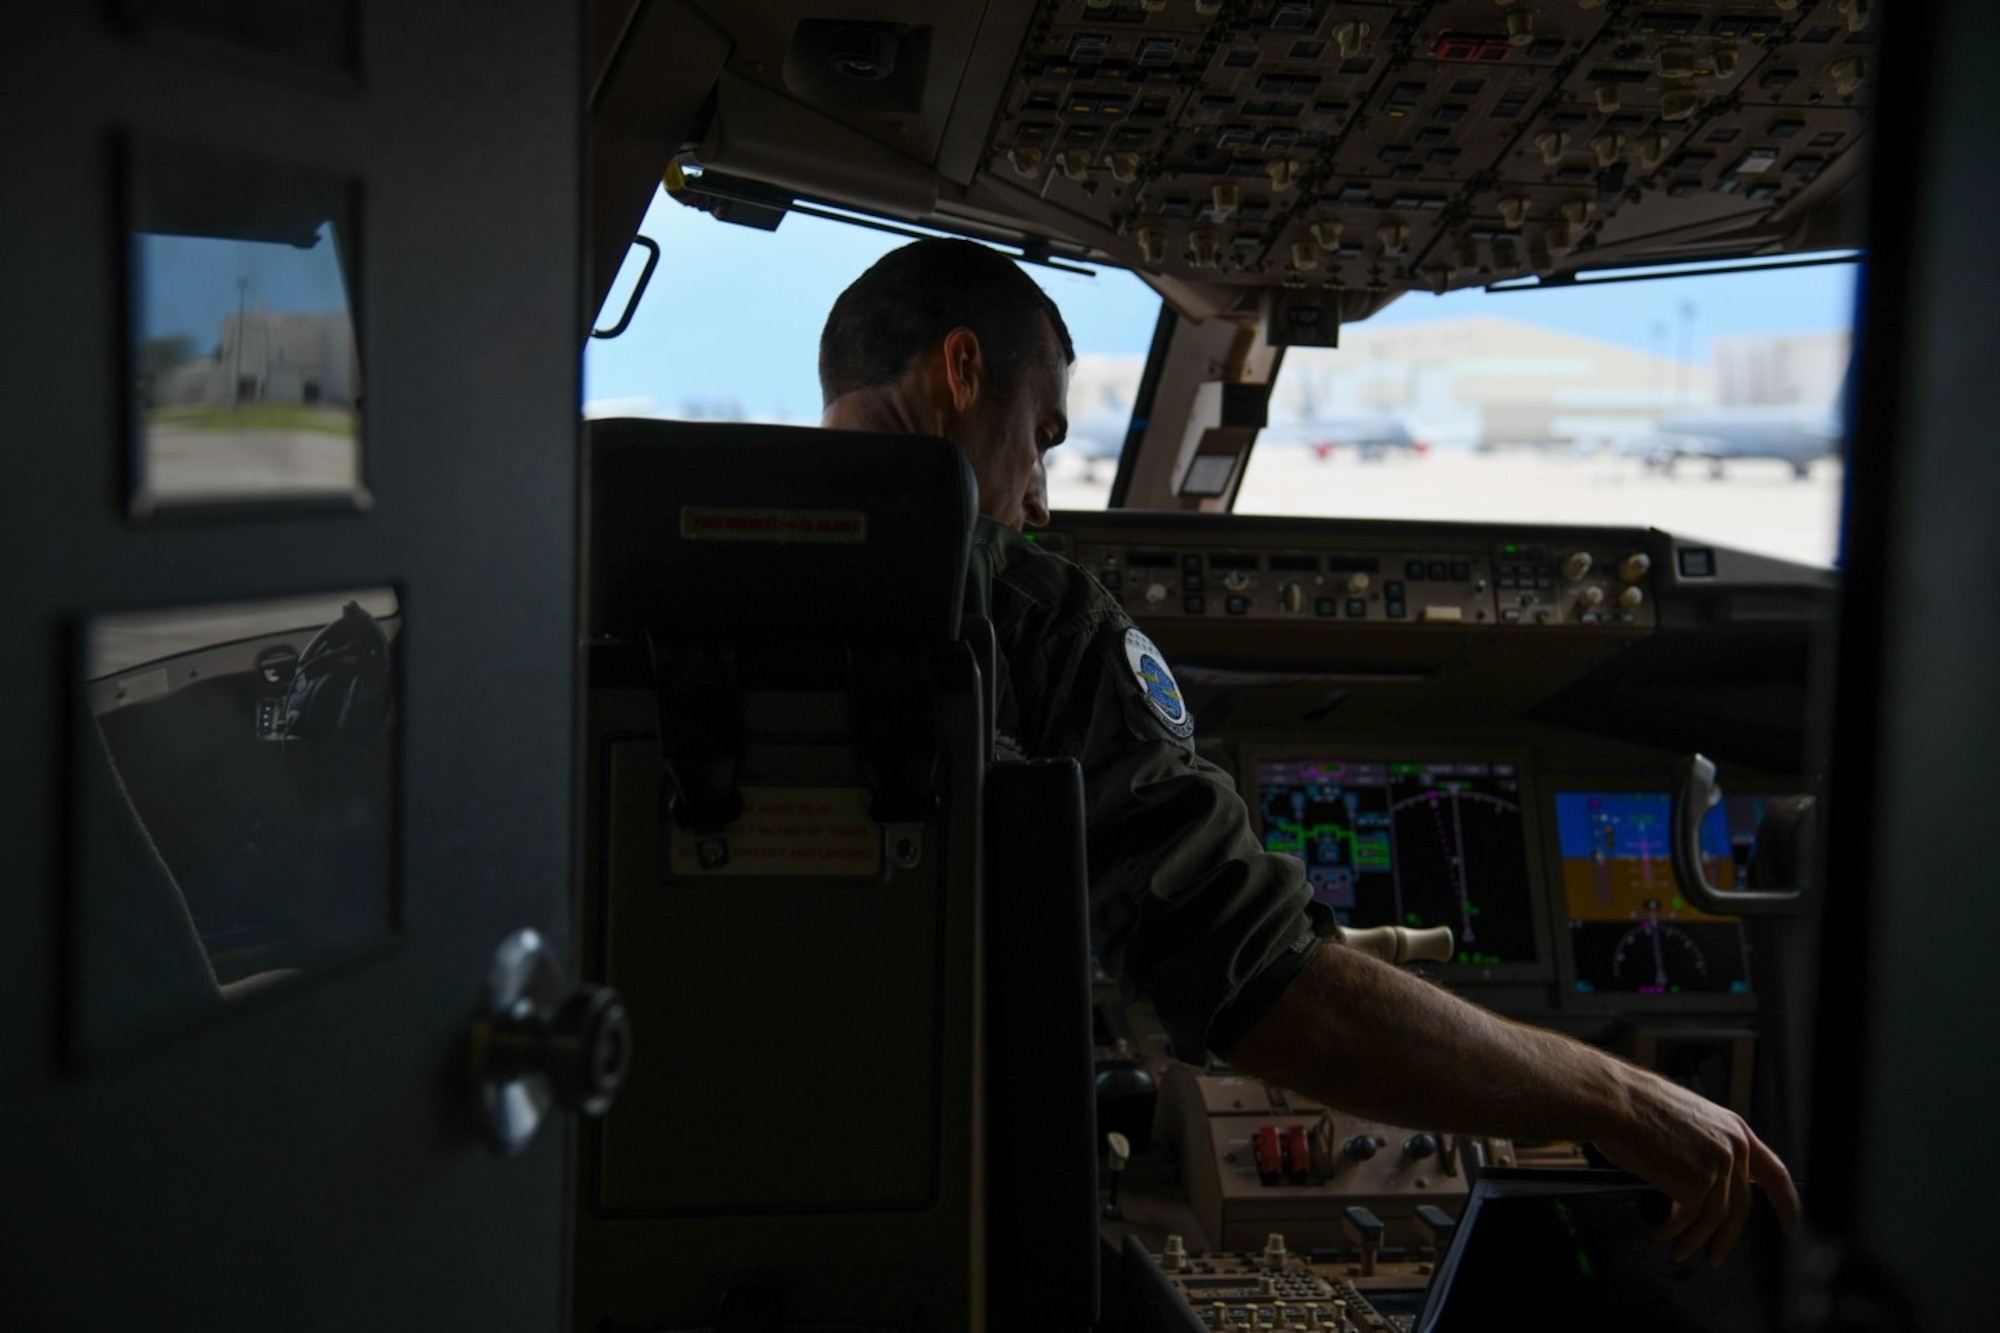 Maj. Michael Murphy, 905th Air Refueling Squadron pilot, conducts a preflight check July 9, 2020, at McConnell Air Force Base, Kansas. Murphy was part of a seven-man aircrew team that participated in a total force initiative to test capabilities of aeromedical evacuation on the KC-46A Pegasus. The mission marked the first aeromedical evacuation of live patients to be carried out by the KC-46. (U.S. Air Force photo by Airman 1st Class Nilsa Garcia)